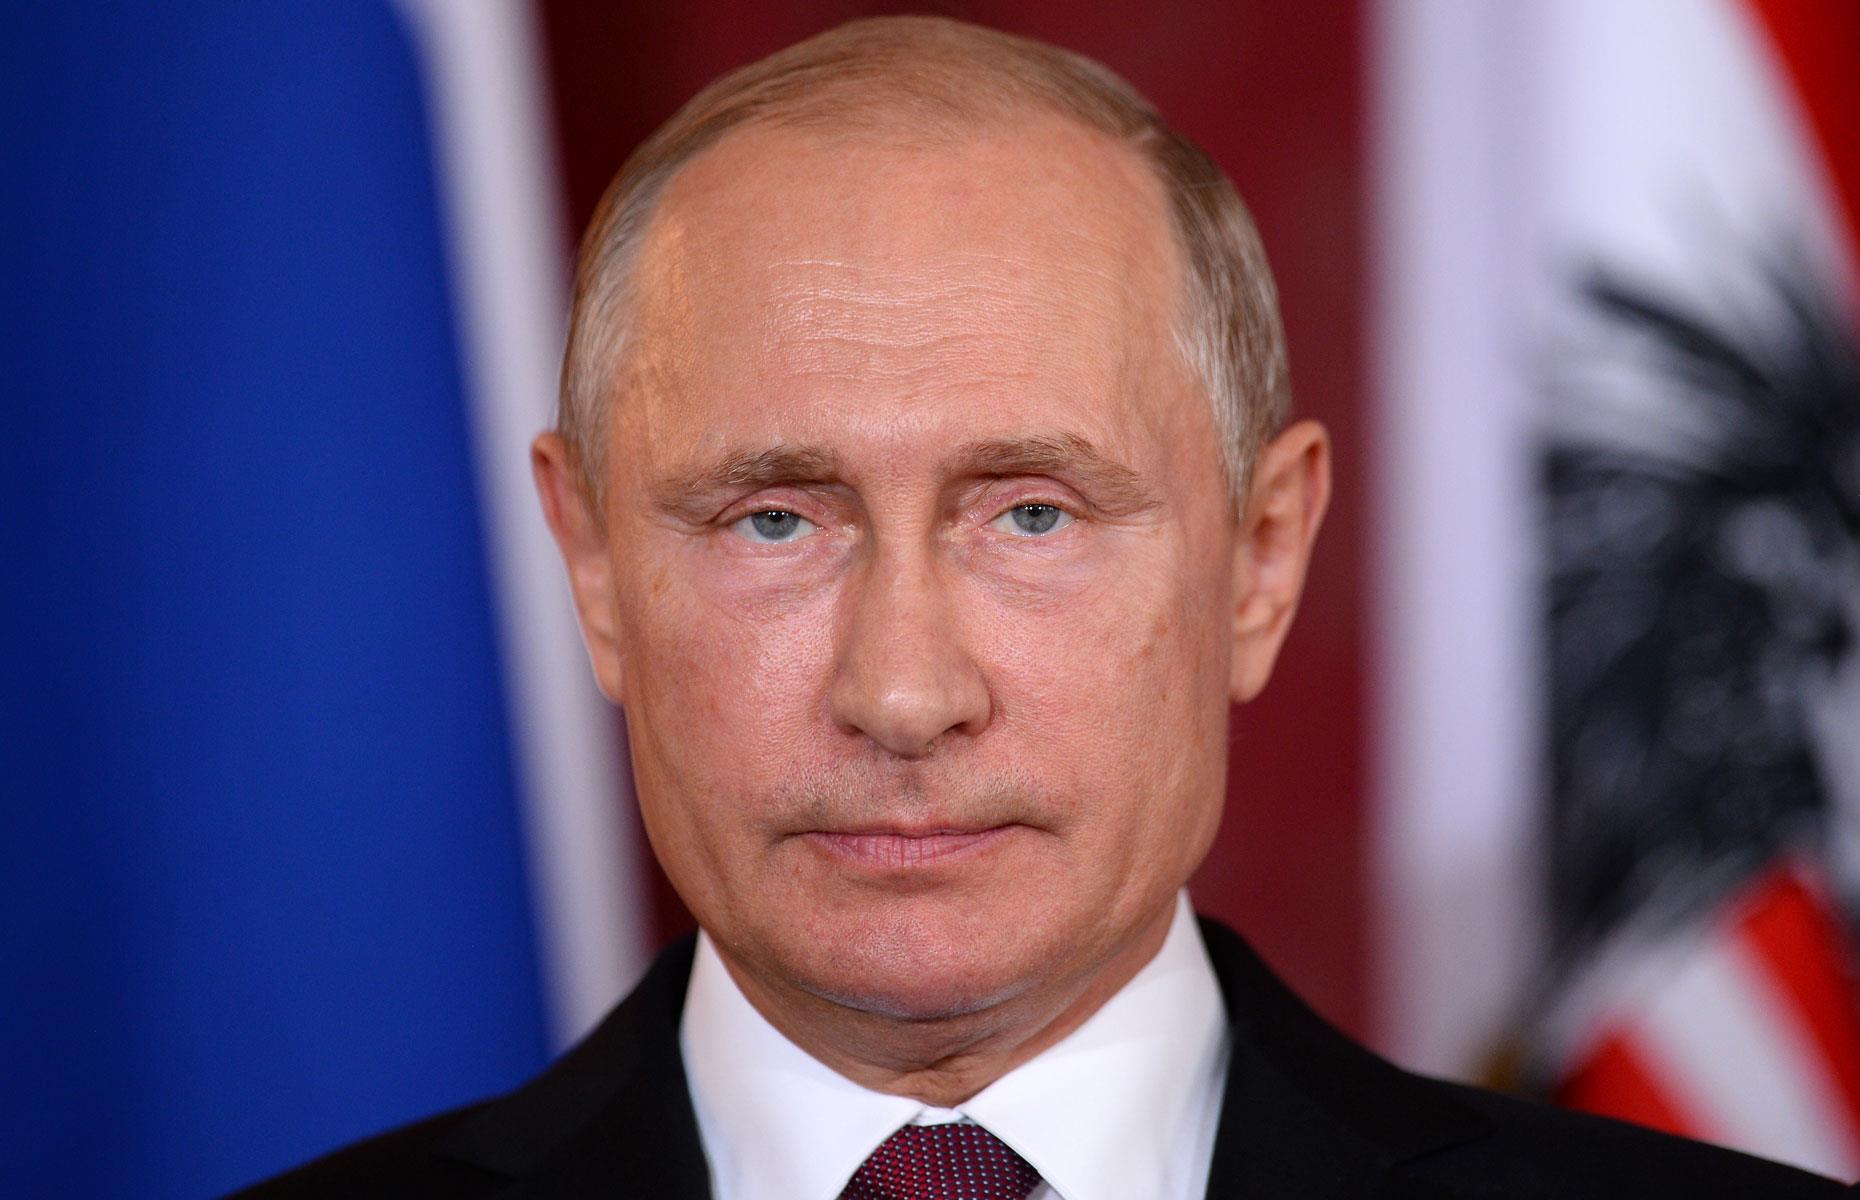 <p>The dubious accolade of richest world leader of all time goes to two heads of state. One of them is Vladimir Putin. In 2018, the Russian president's official salary totalled 8.6 million rubles, which is the equivalent of $116,000, but he was reportedly worth up to $200 billion in 2017 according to former Hermitage Capital Management CEO Bill Browder, who revealed his estimate under oath to the US Senate Judiciary Committee. The money is allegedly tied up in numerous banks and investments in the West. Already Russia's longest serving leader since Josef Stalin, new legislation passed in July could allow the billionaire to rule until 2036, giving him plenty of time to amass even more wealth.</p>